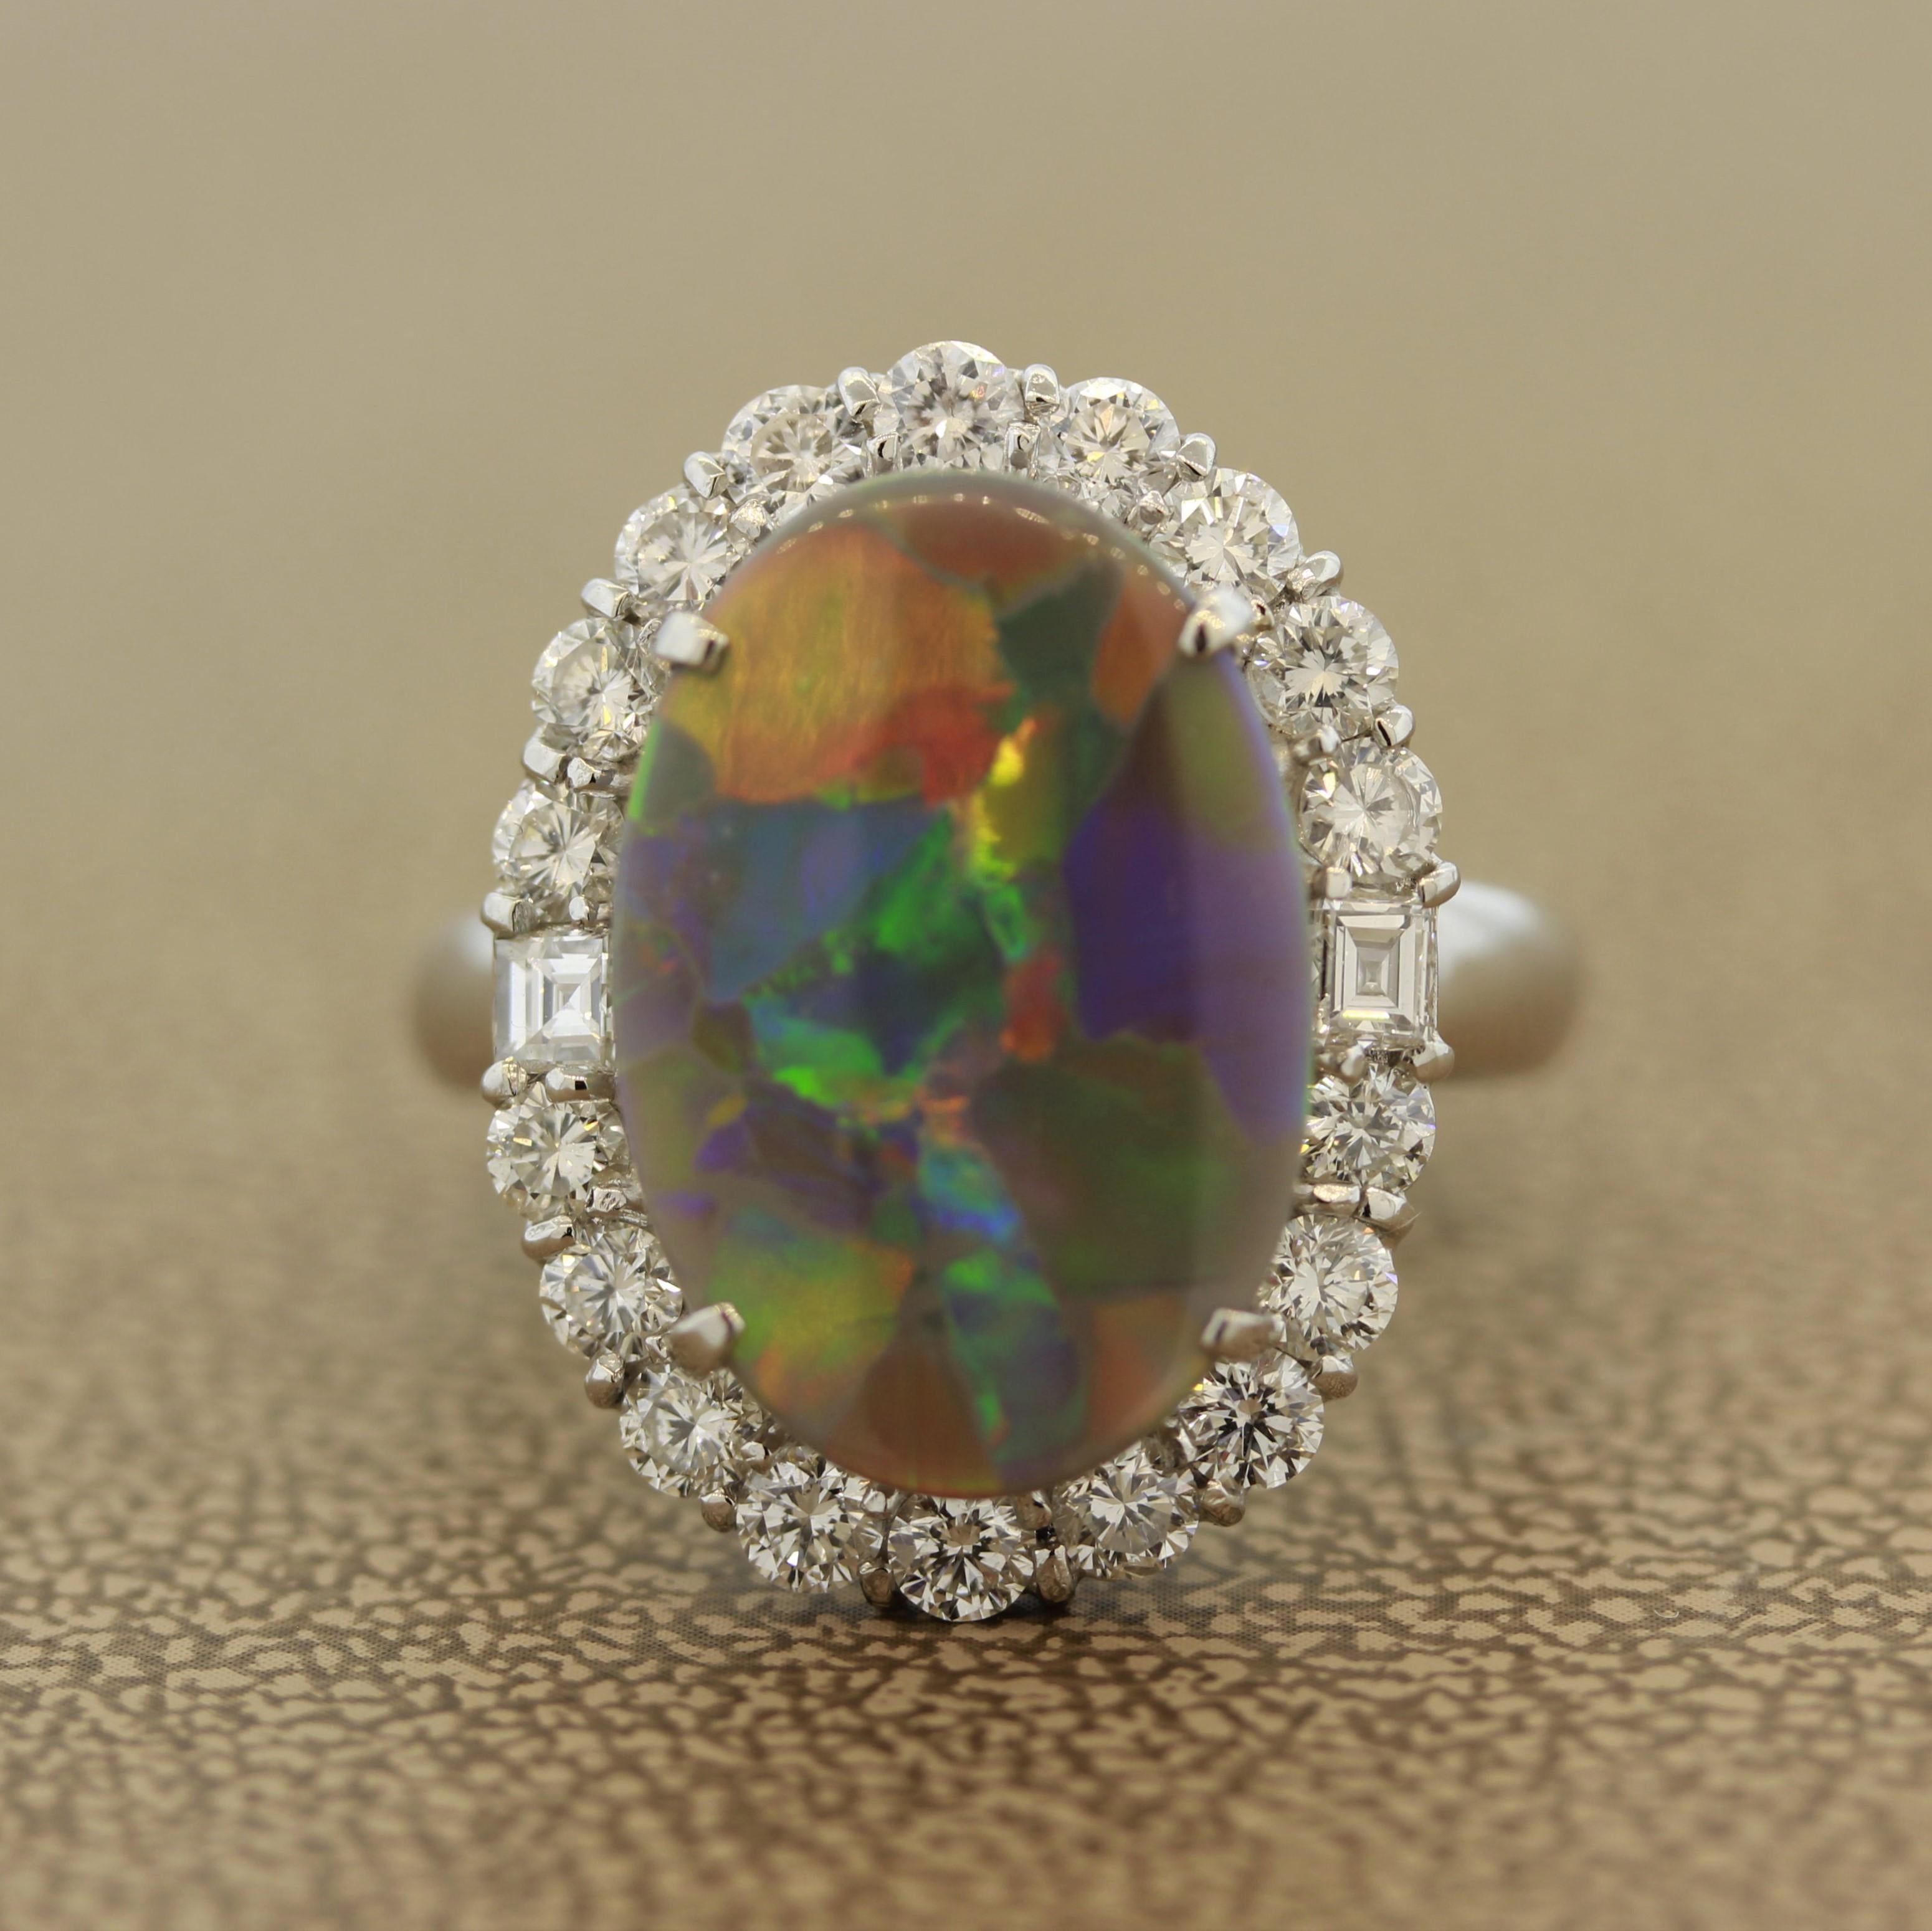 A harlequin pattern is rarely found in opal and is highly prized in the opal community from dealers to collectors. It has a repeating mosaic-like pattern that showcases the opals play of color. In this fine example from Lightning Ridge Australia, we